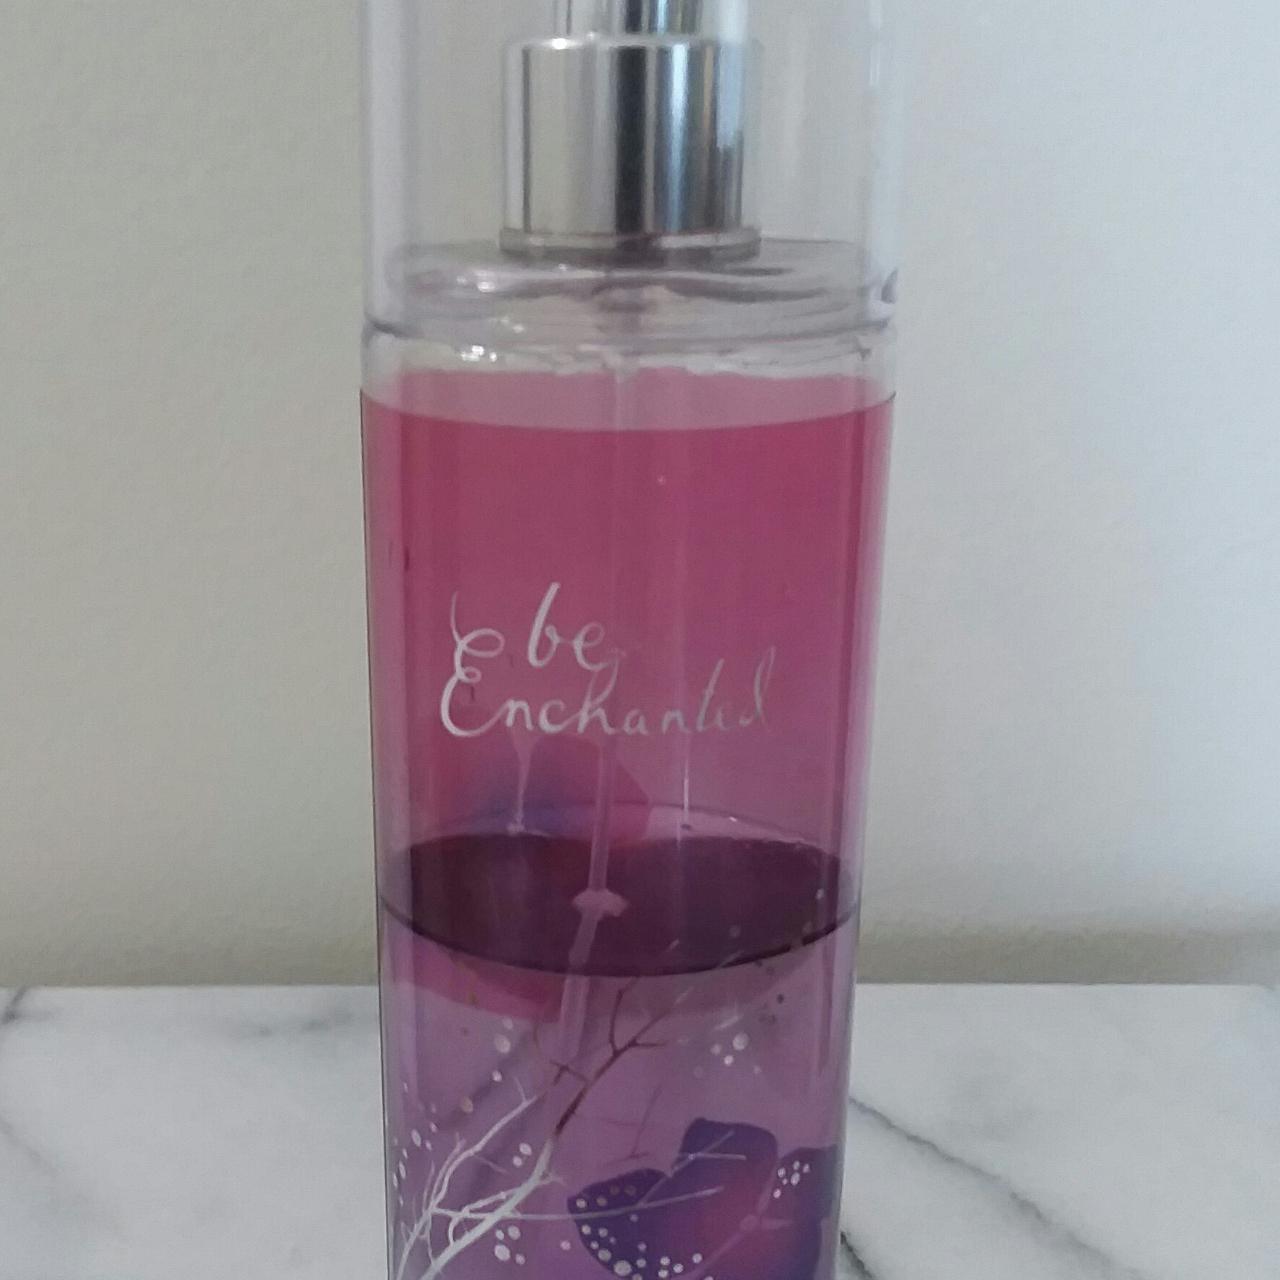 Product Image 3 - Bath & Body Works "Be